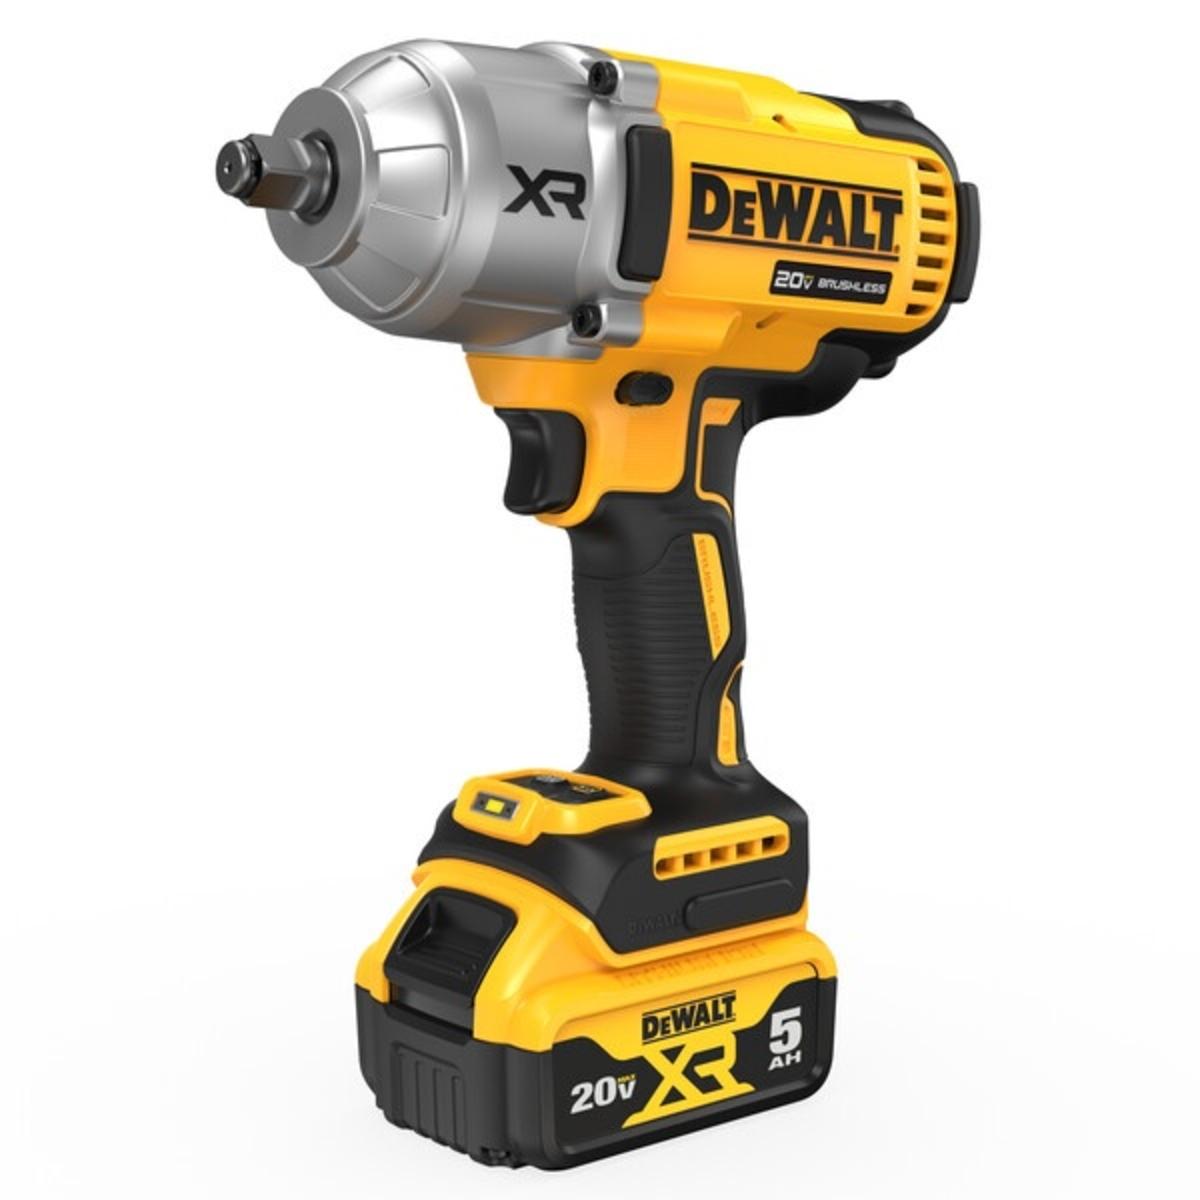 DeWalt 20V MAX* XR® 1/2 In. High Torque Impact Wrench Side View 2